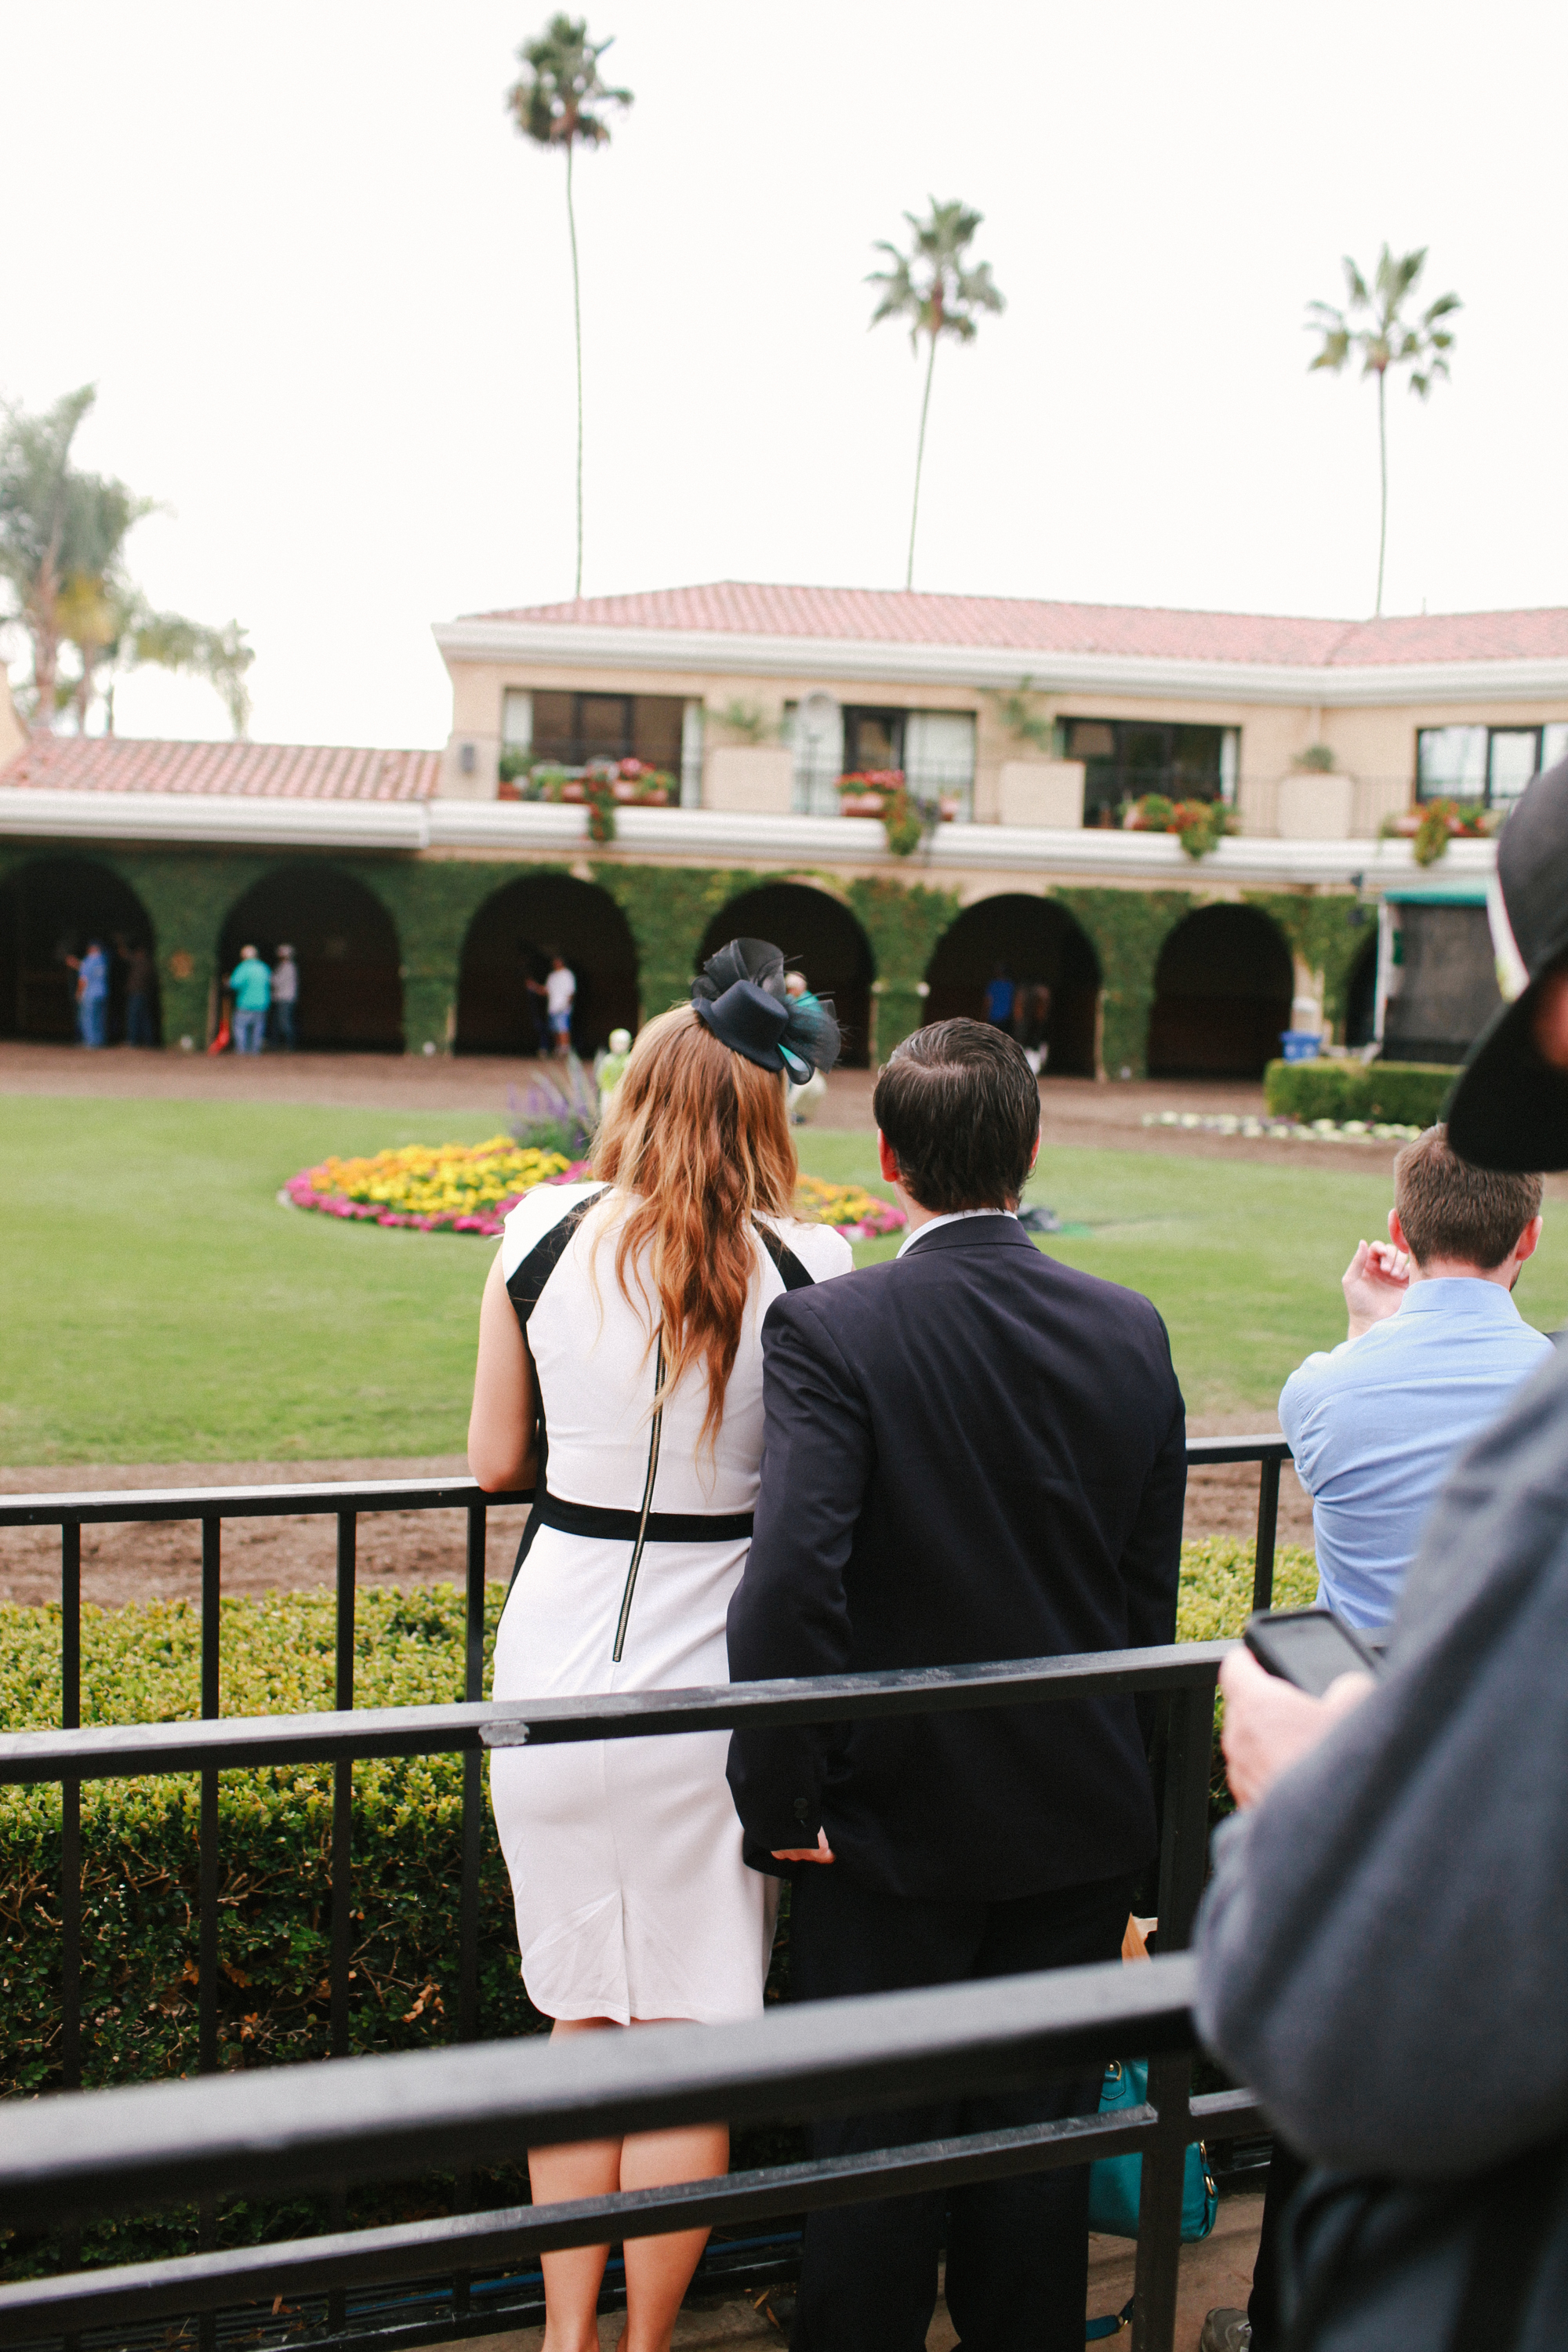 Established California | Things to Do | Del Mar Racetrack